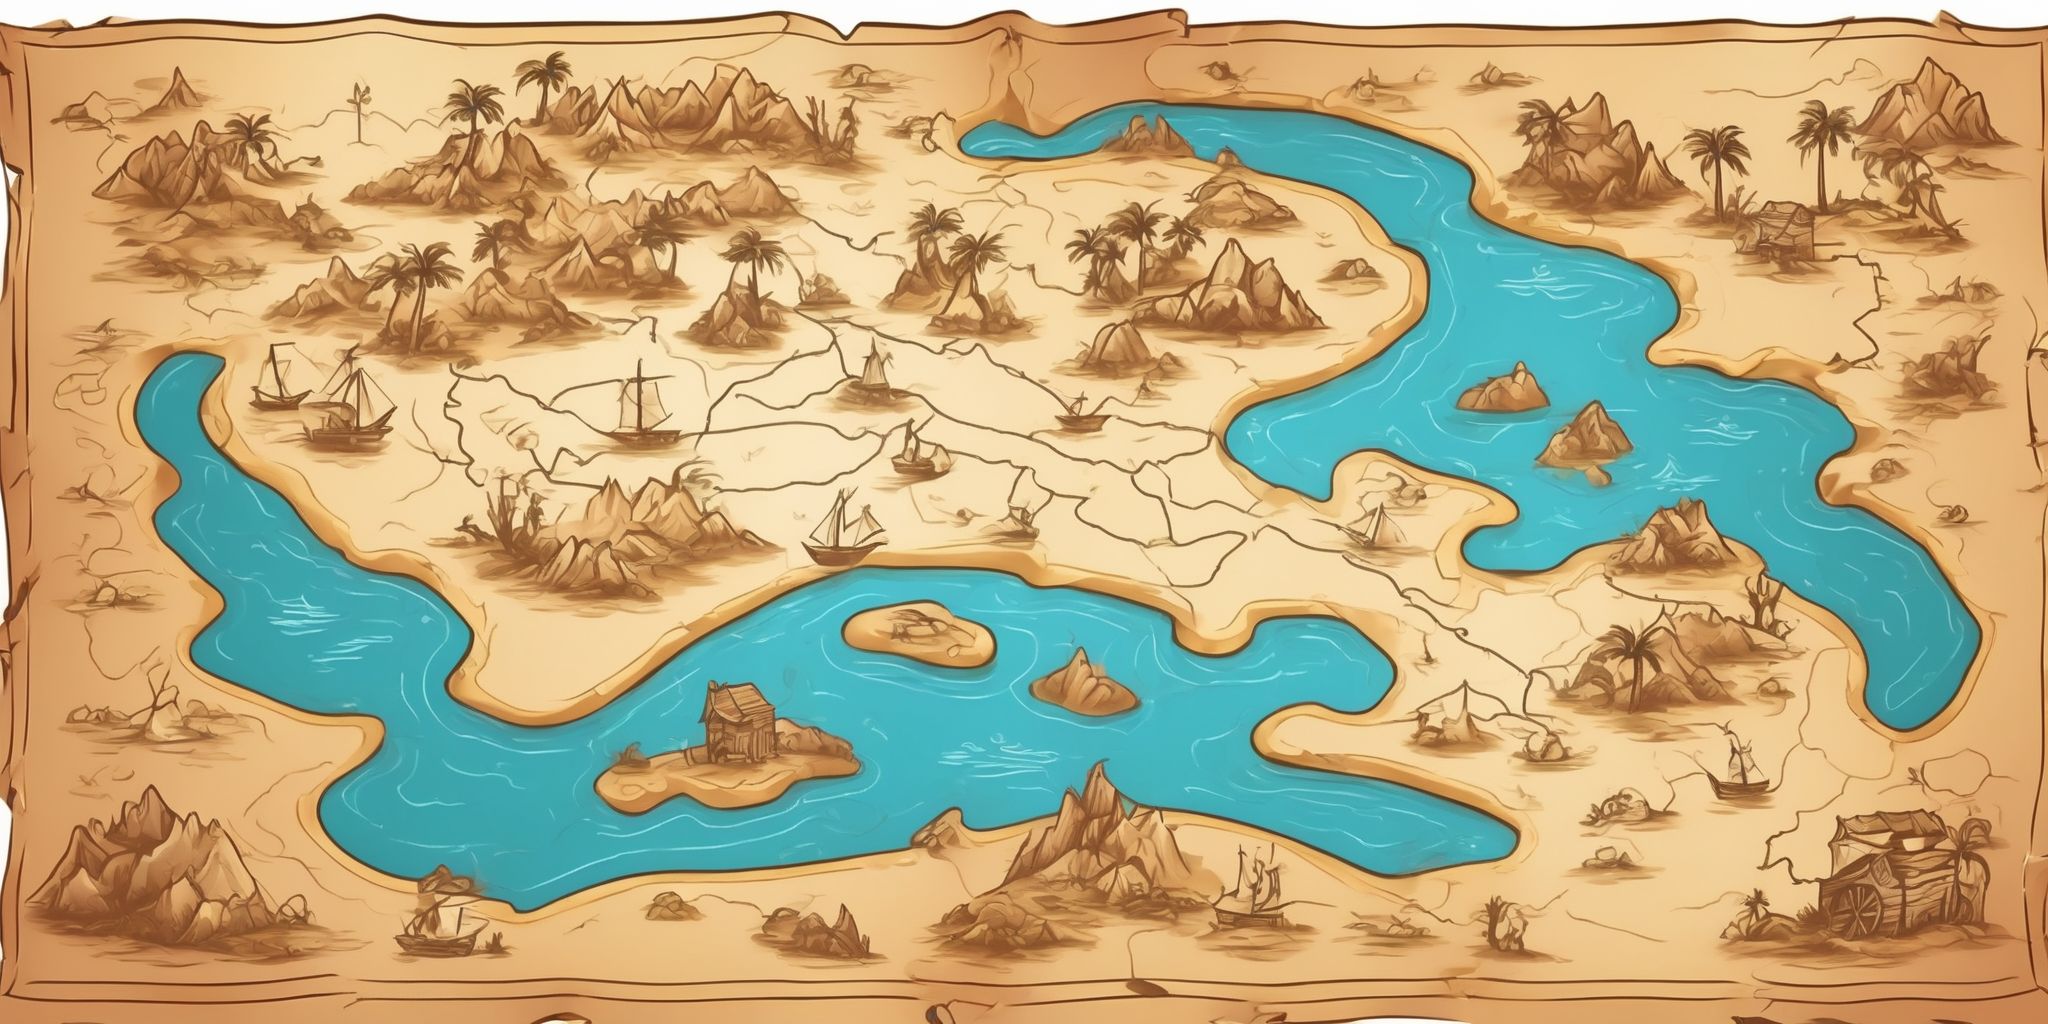 Treasure map in illustration style with gradients and white background